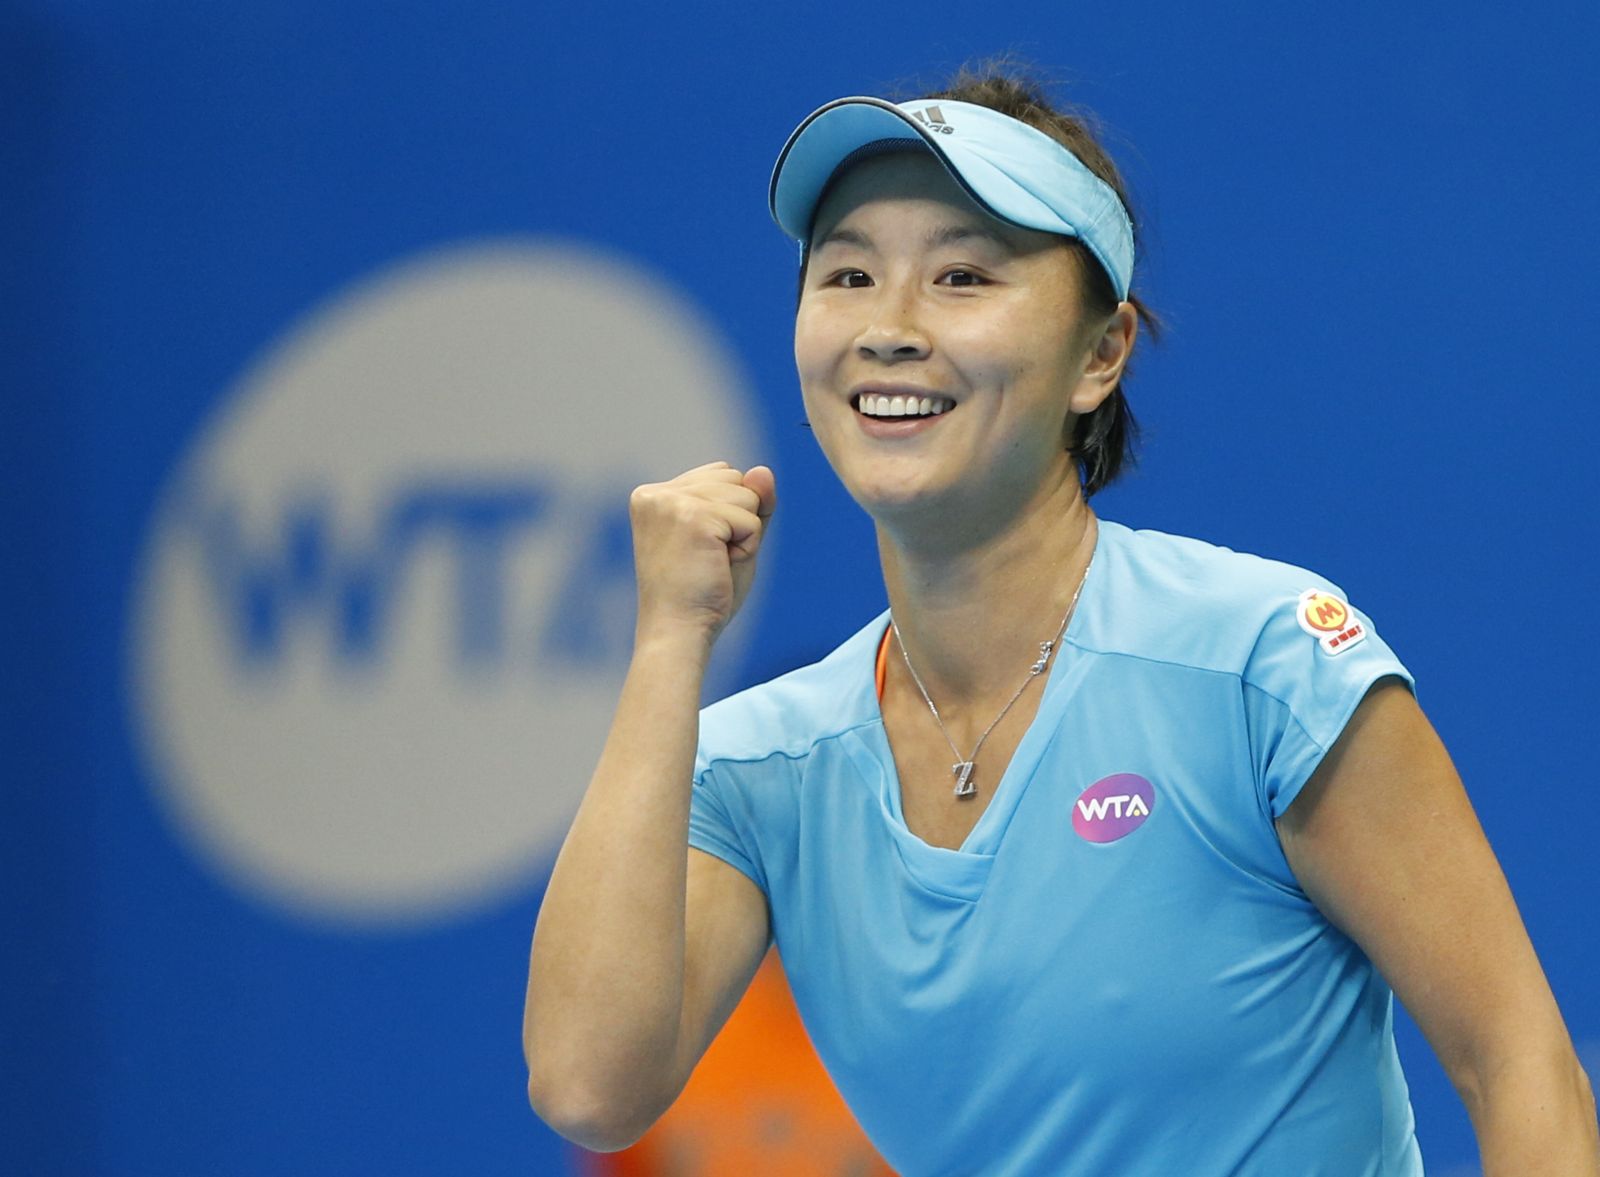 epa09591477 (FILE) - Peng Shuai of China celebrates after defeating Lucie Safarova of Czech Republic during the women's singles semi-final match of the Taiwan open tennis tournament in Taipei, Taiwan, 04 February 2017 (re-issued 19 November 2021). The Women’s Tennis Association (WTA) chief executive Steve Simon said in an interview with a US broadcaster on 18 November 2021 that the WTA could pull their business and deals out of China over the uncertainty of Peng Shuai's situation. Peng has not been seen in public since 02 November 2021 following a post of her on social alleging that she was sexually assaulted by a former Chinese vice premier.  EPA/RITCHIE B. TONGO *** Local Caption *** 53301872